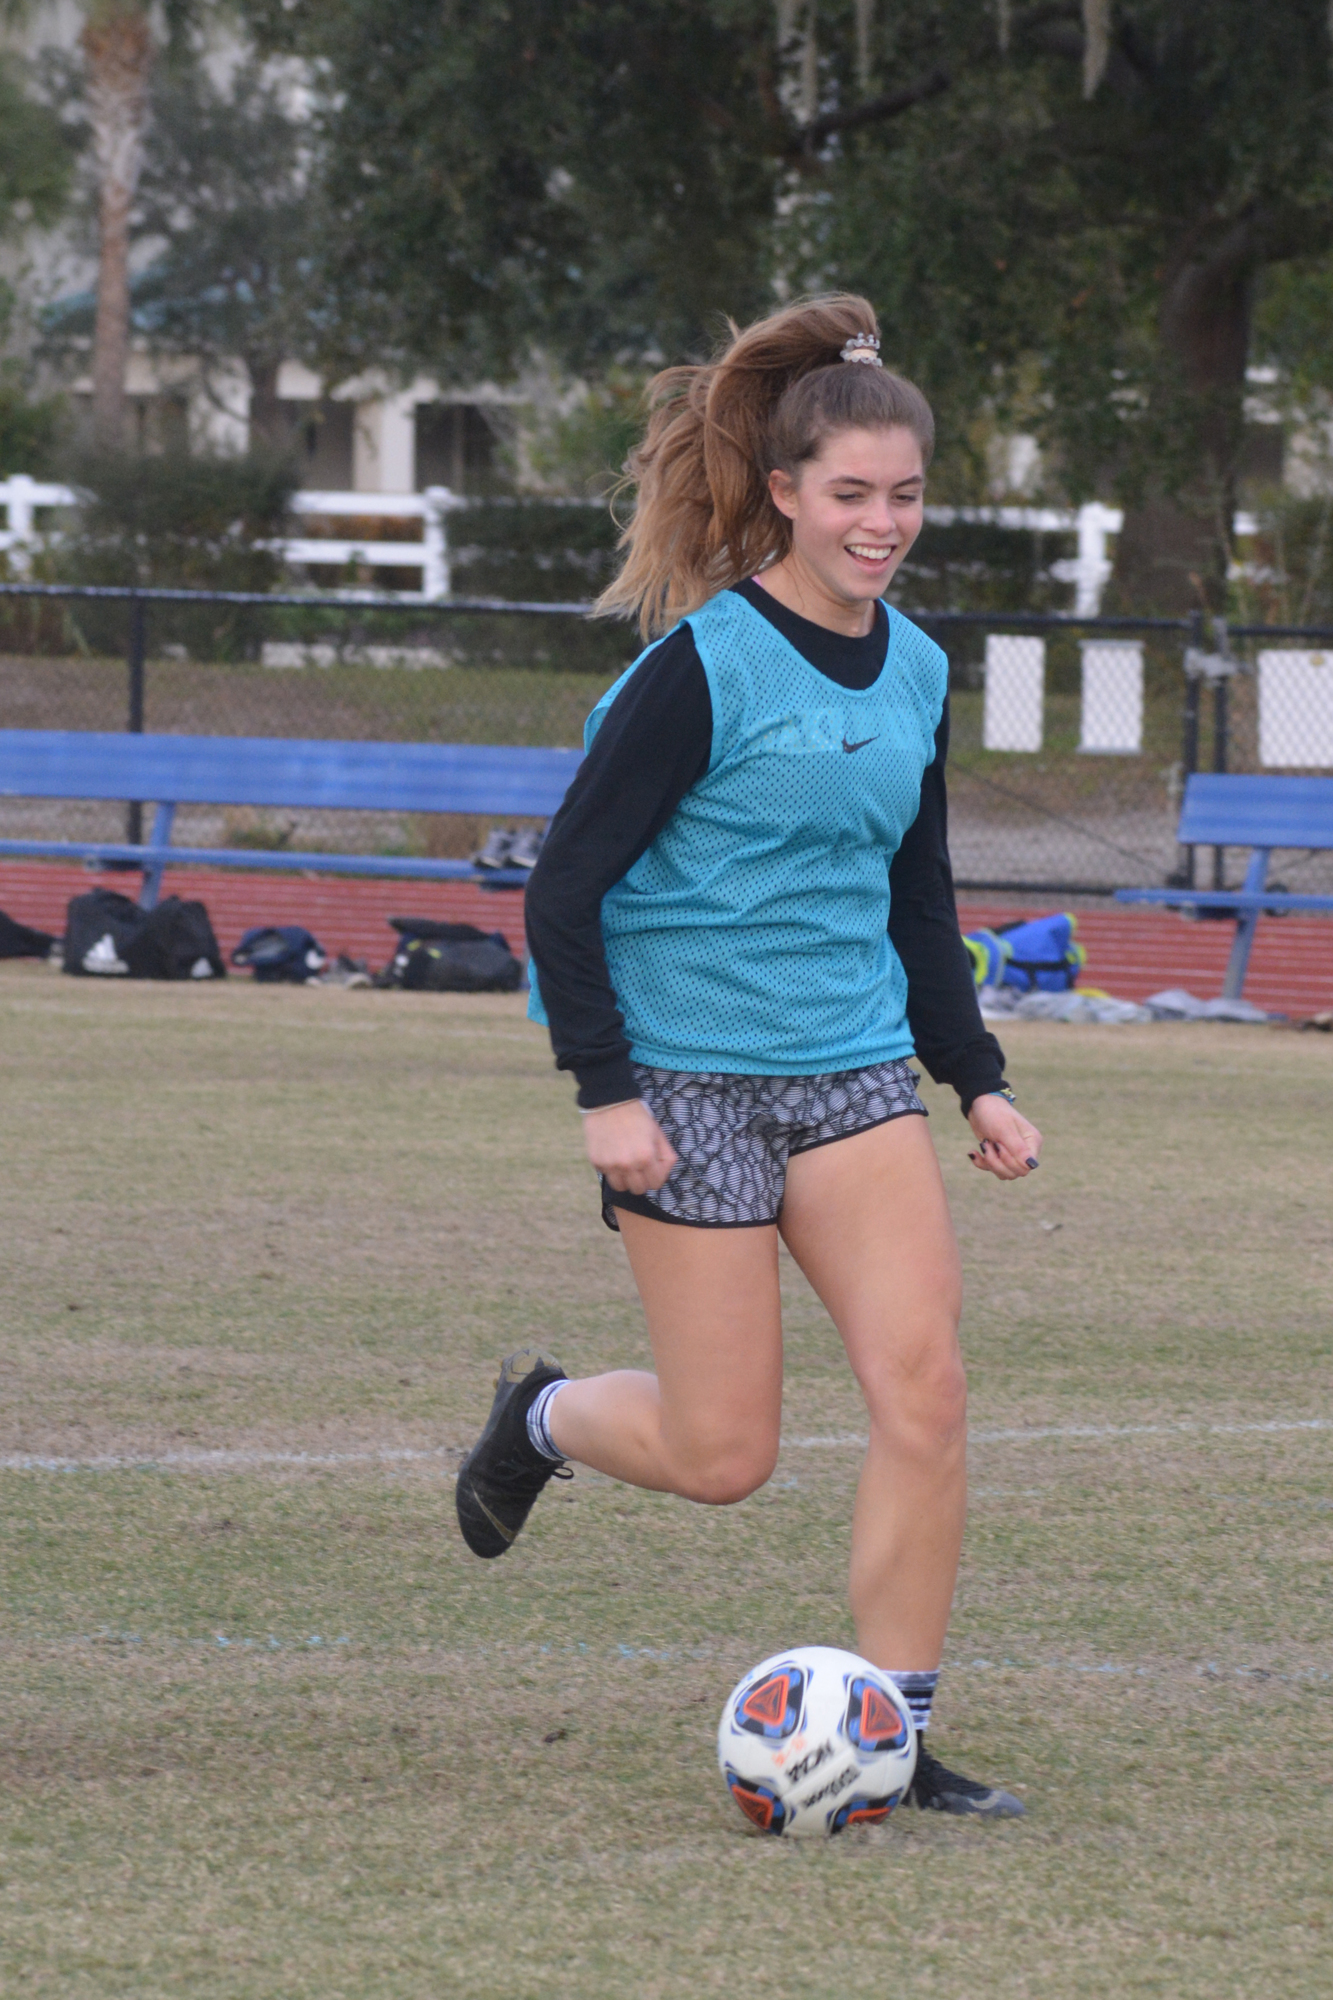 ODA senior midfielder Madisyn Opstal, who has signed with Wake Forest University, takes a run at the net during practice. She has six goals and eight assists through five games, as of Dec. 13.